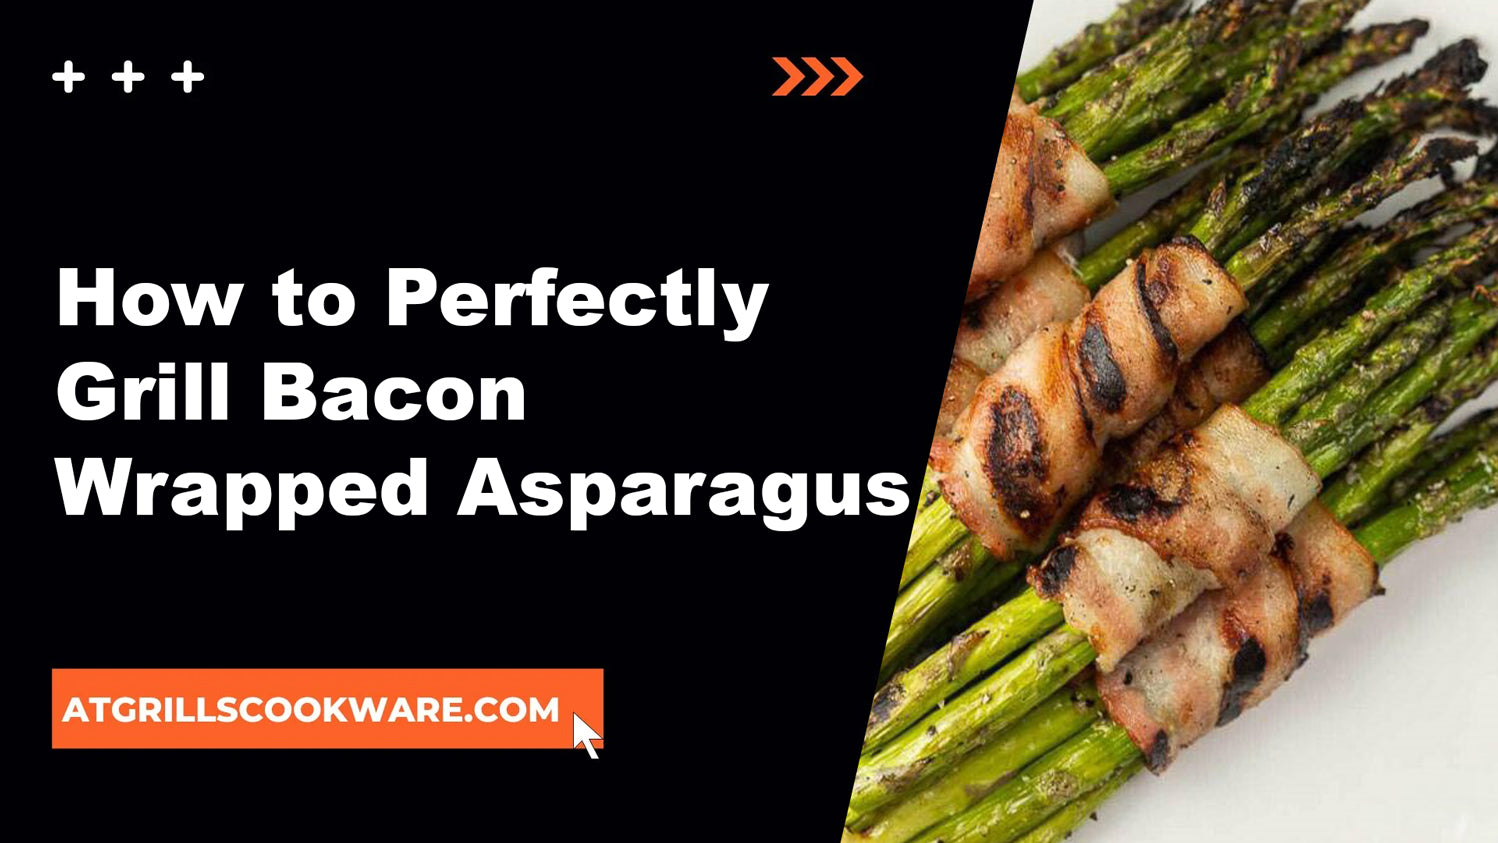 How to Master the Art of Grilling Bacon Wrapped Asparagus